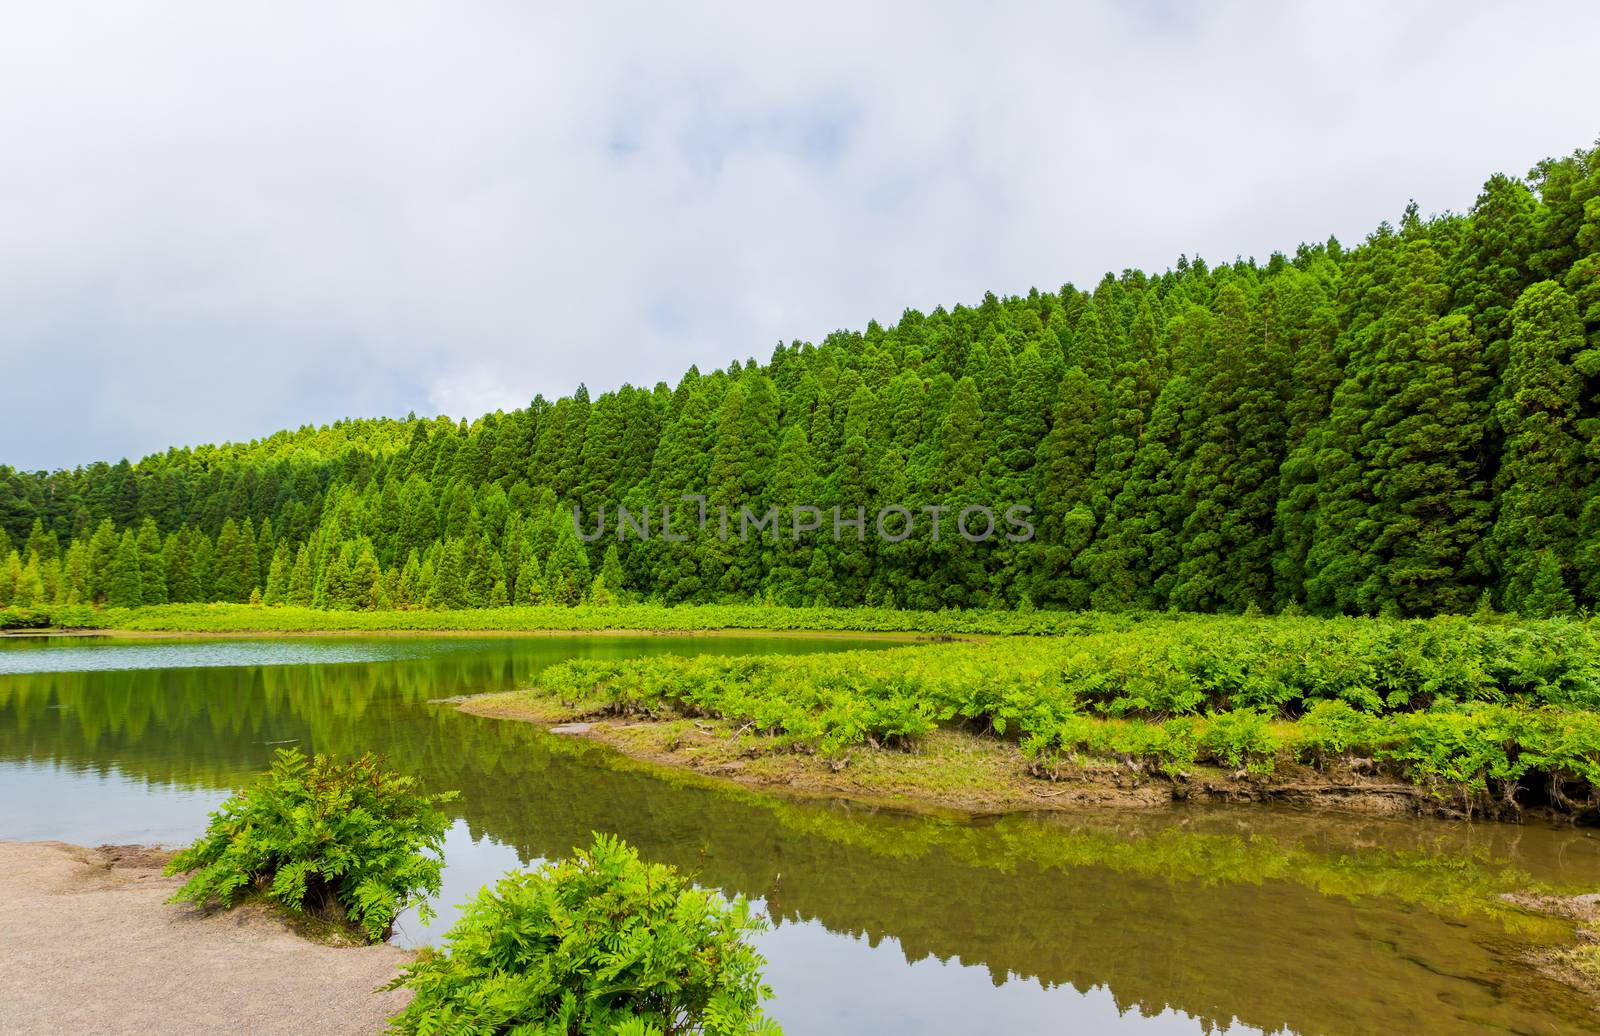 Lagoa do Canario. View of the green lagoon of Canary lake in Sao Miguel island, Azores, Portugal on a beautiful sunny say